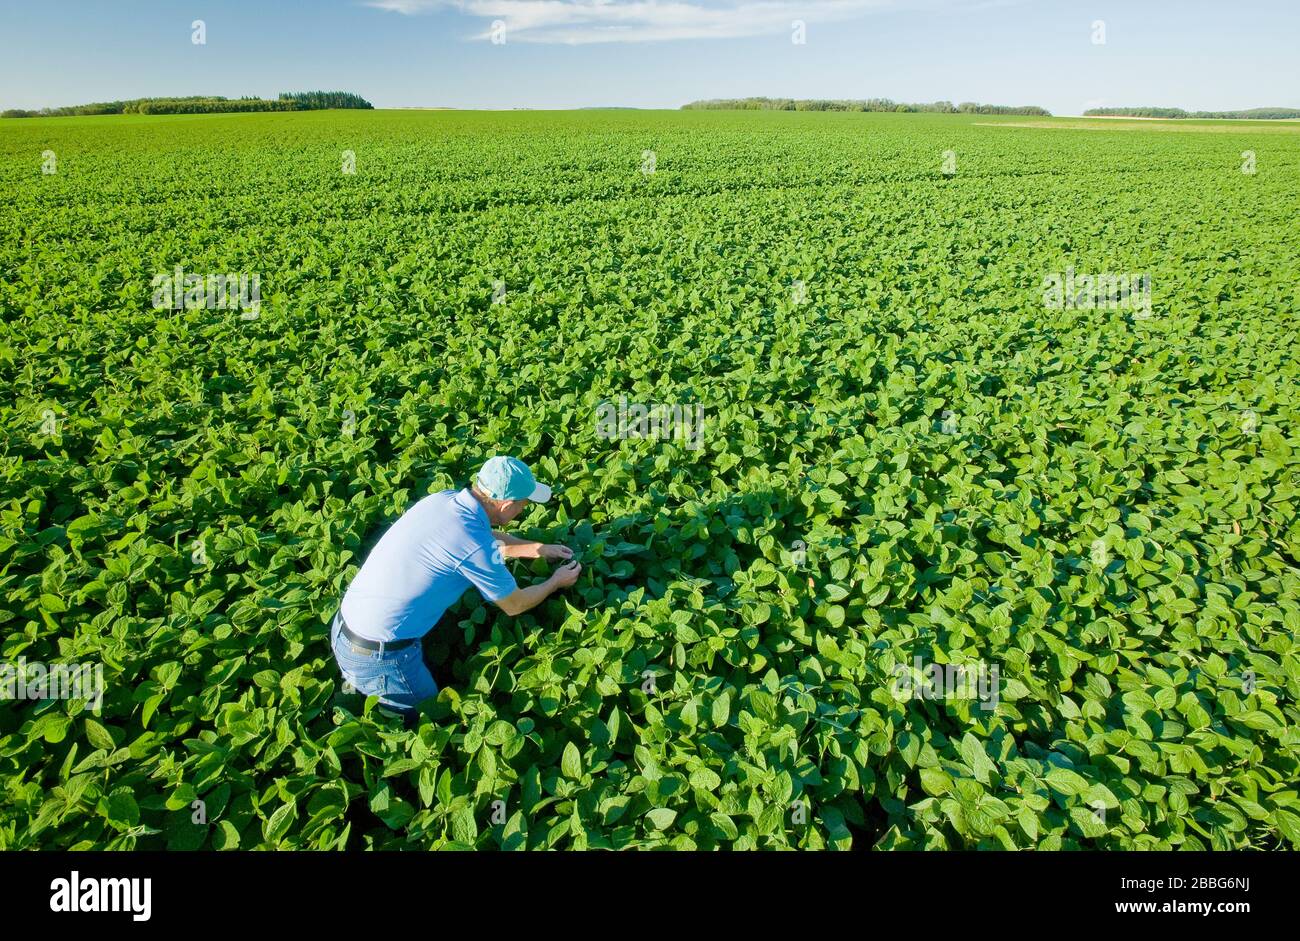 a farmer examines mid growth soybean plants in a field that stretches to the horizon, Tiger Hills, Manitoba, Canada Stock Photo